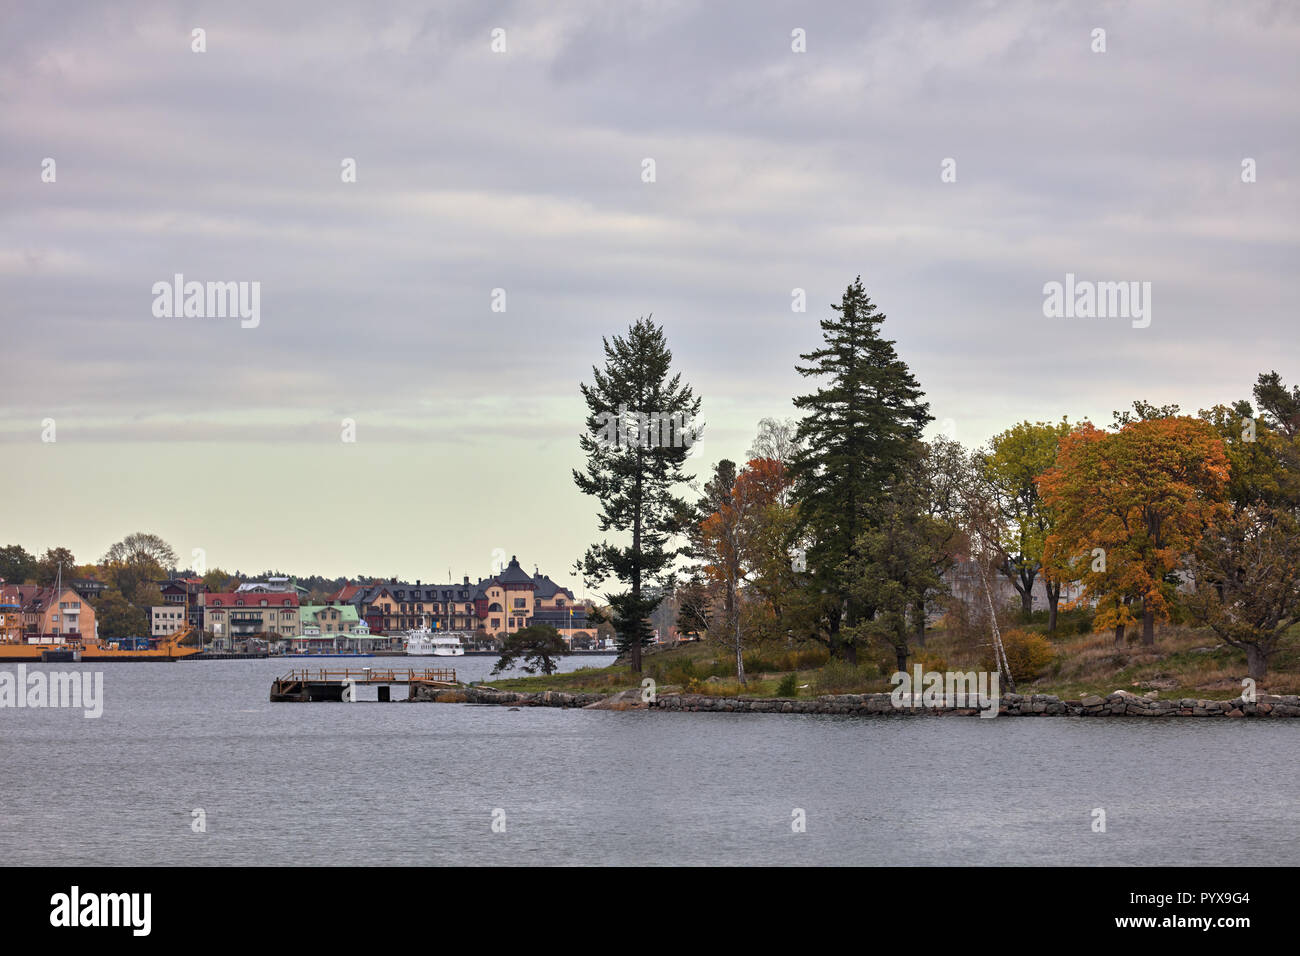 Boat view towards the Stora Ekholmen islet and Vaxholm city in the background near Stockholm, Sweden Stock Photo